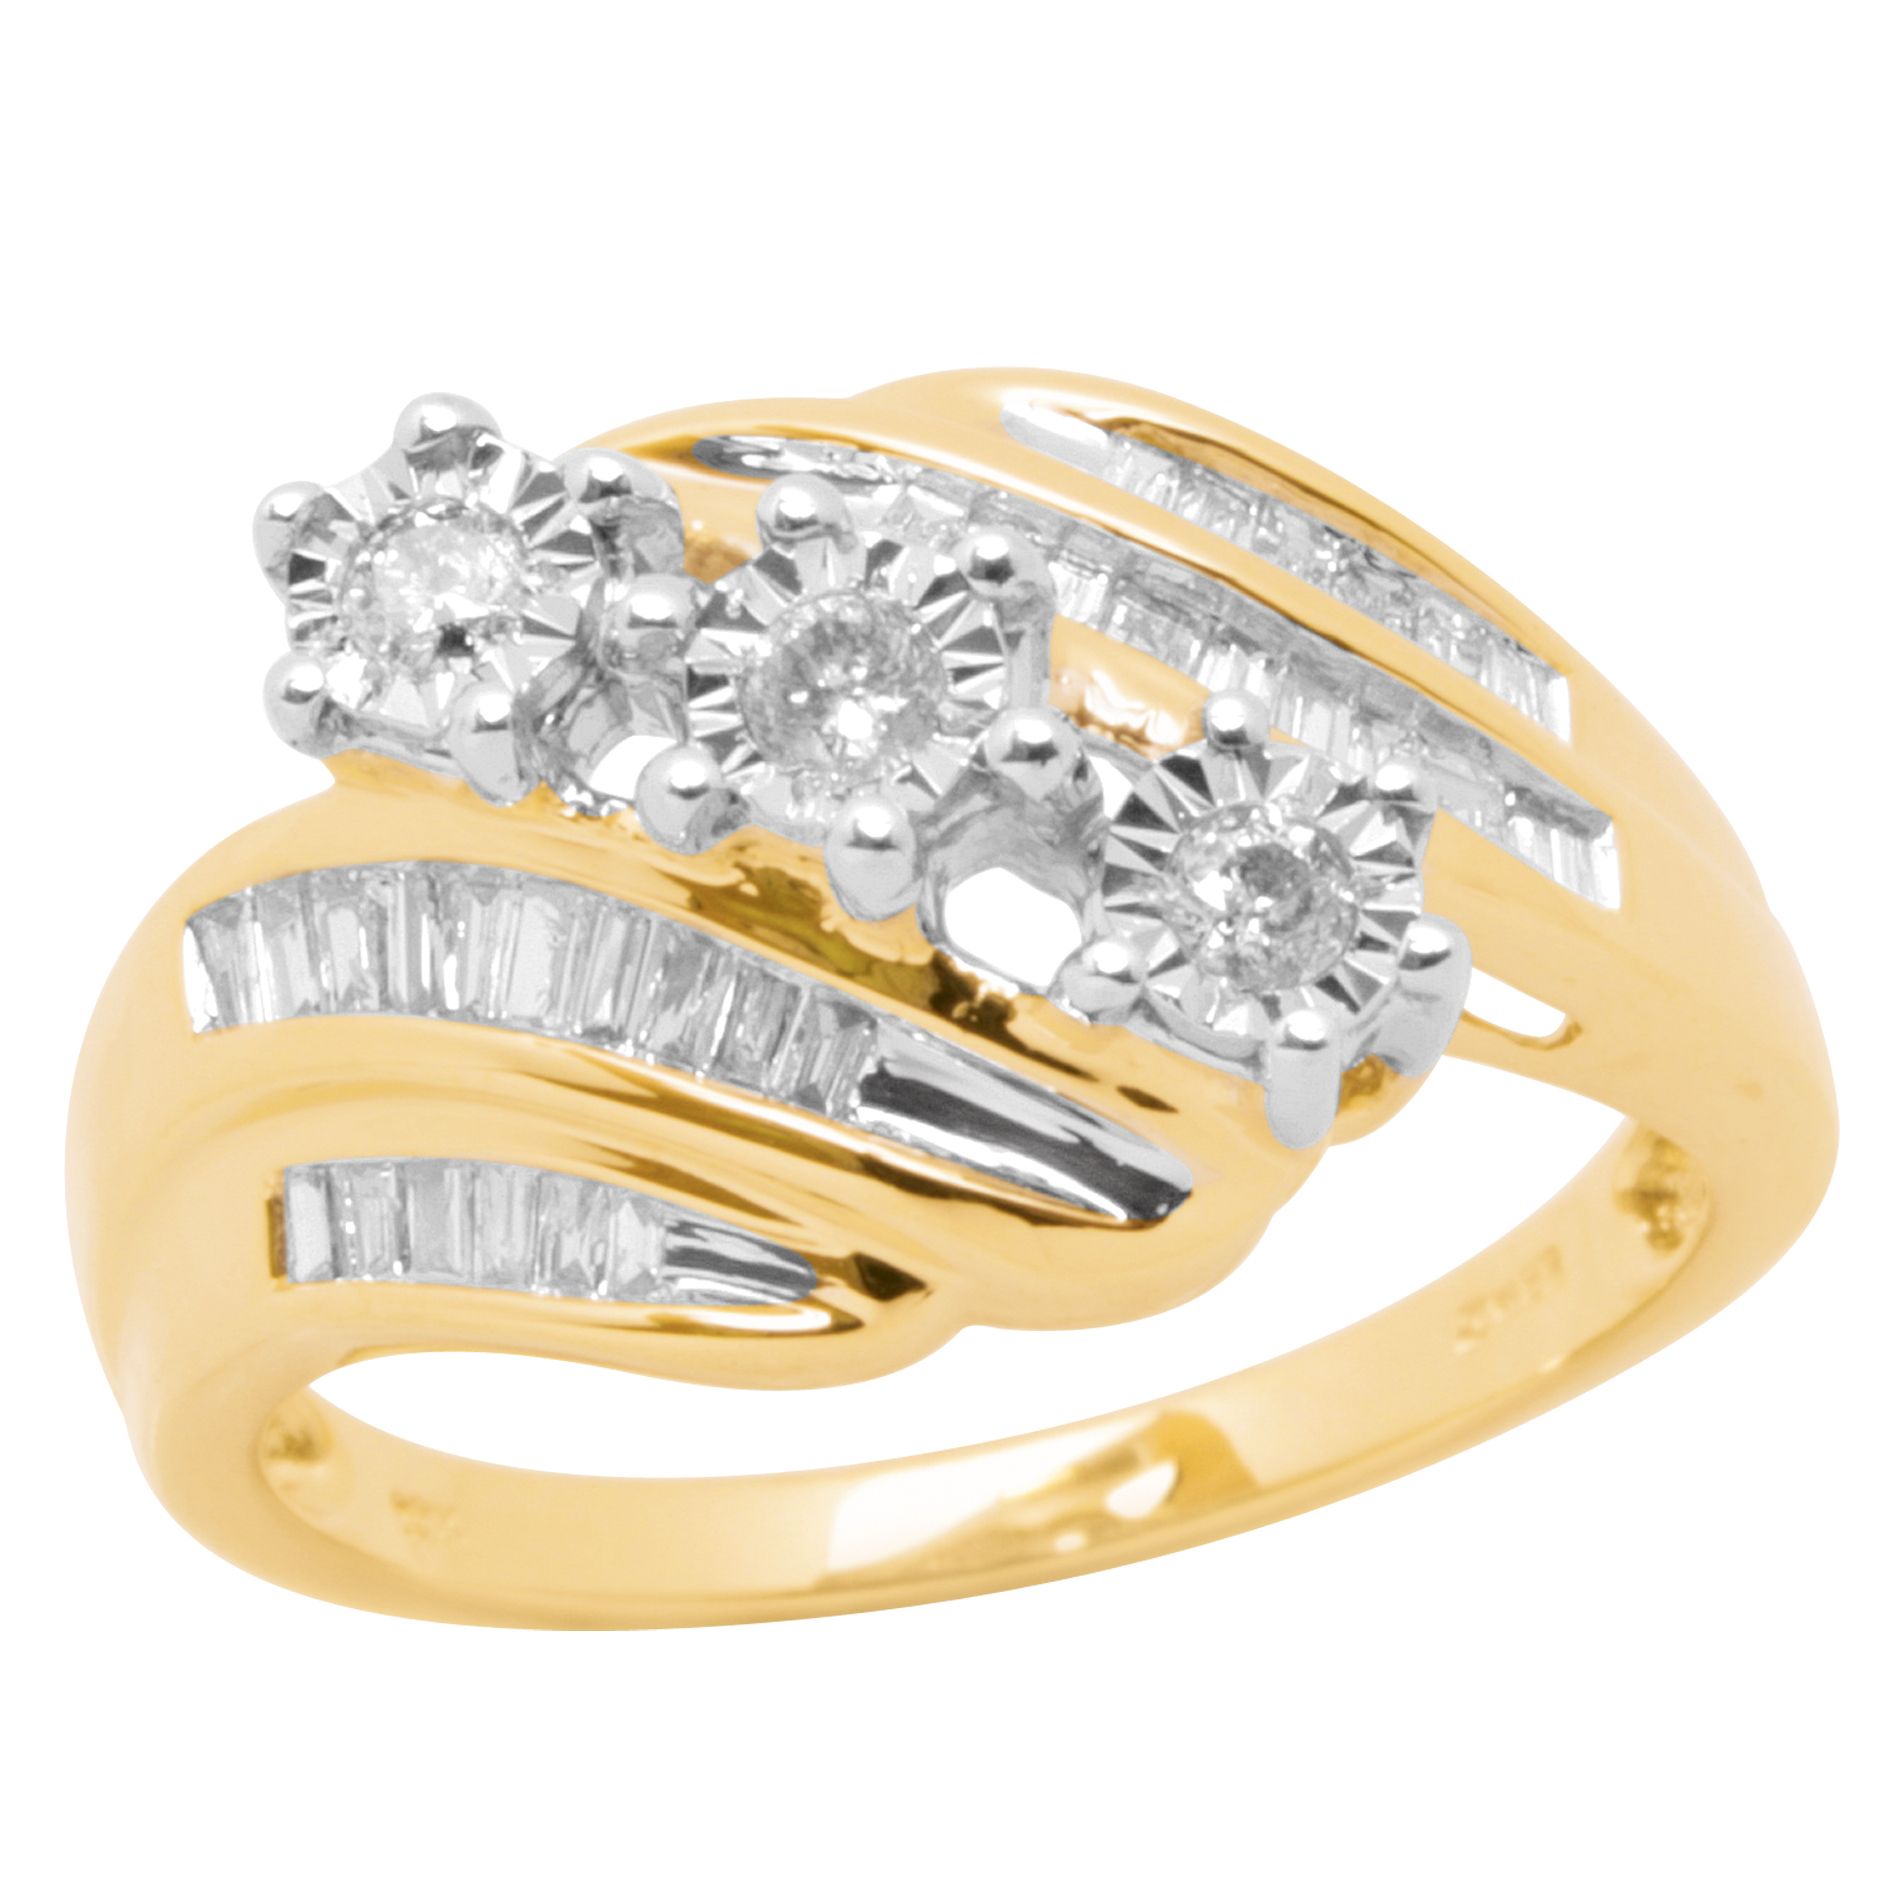 1/2 Cttw Diamond 3-Stone Ring 10 K Yellow Gold_in Size 7